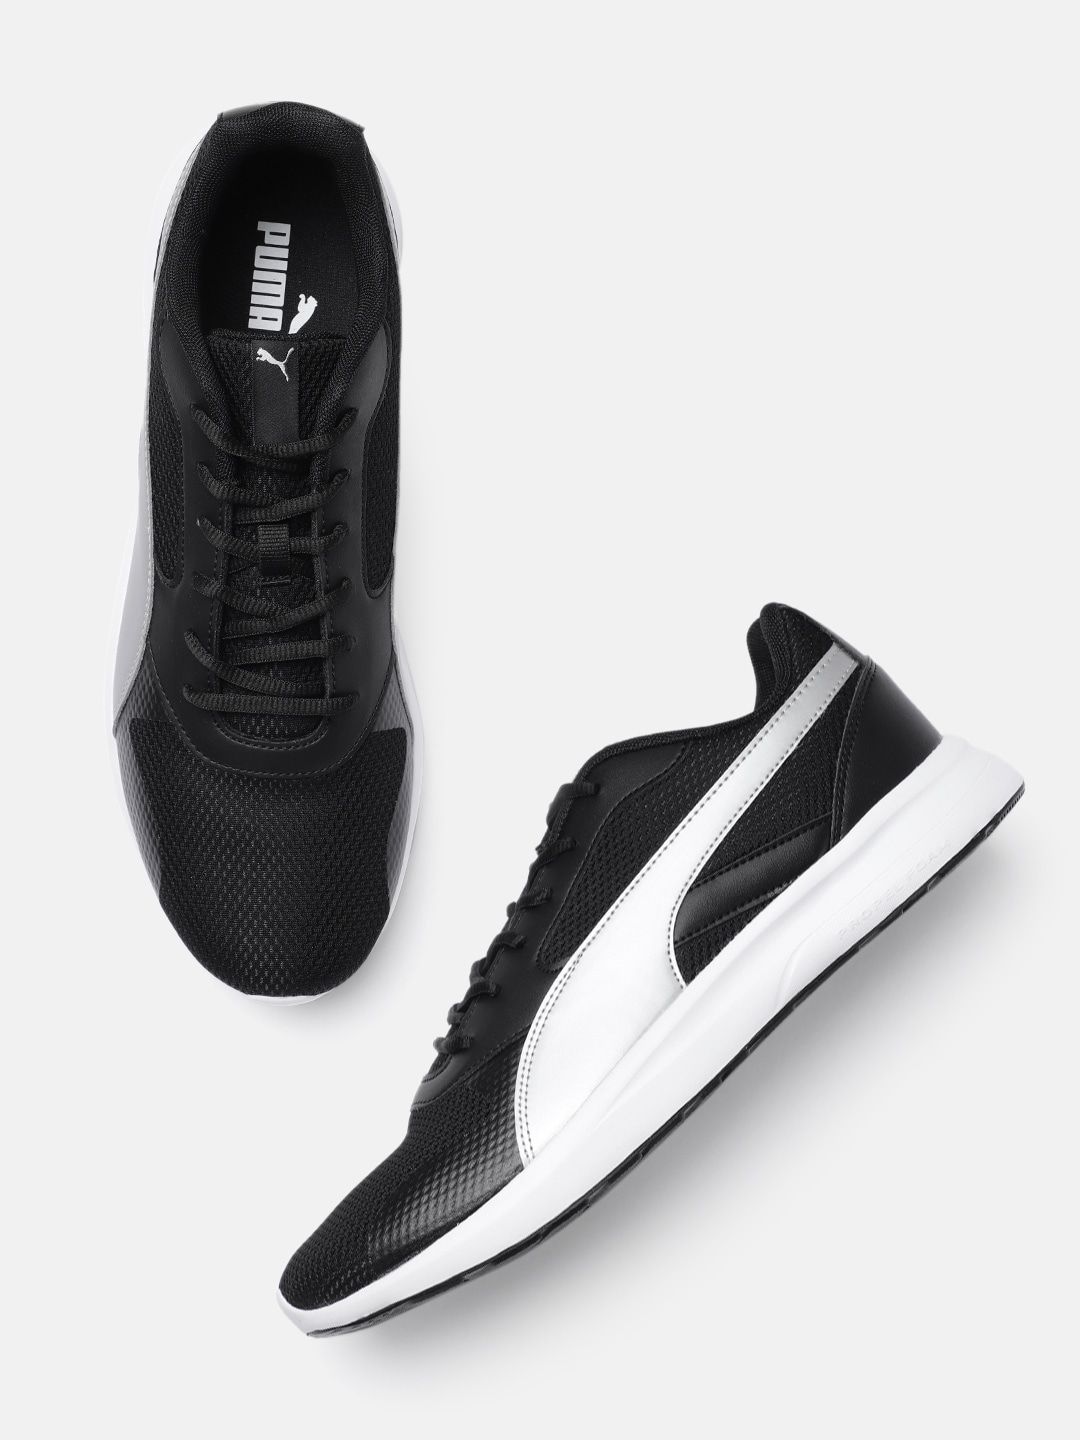 Puma Unisex Black Firefly Sneakers Price in India